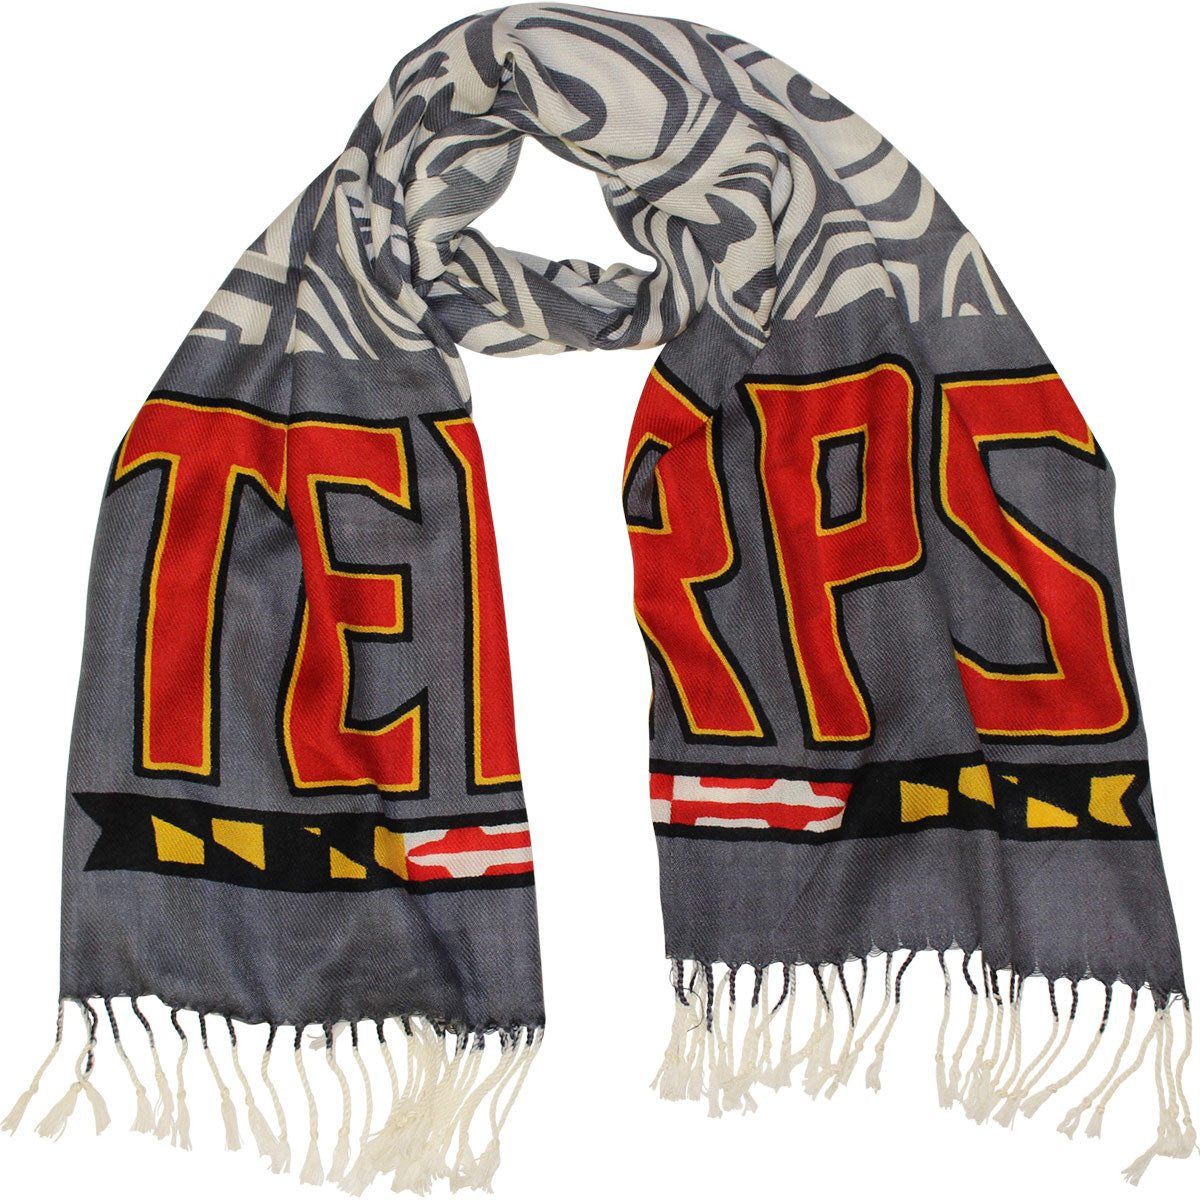 UMD Terps & Turtle Shell (Grey & White) / Scarf - Route One Apparel